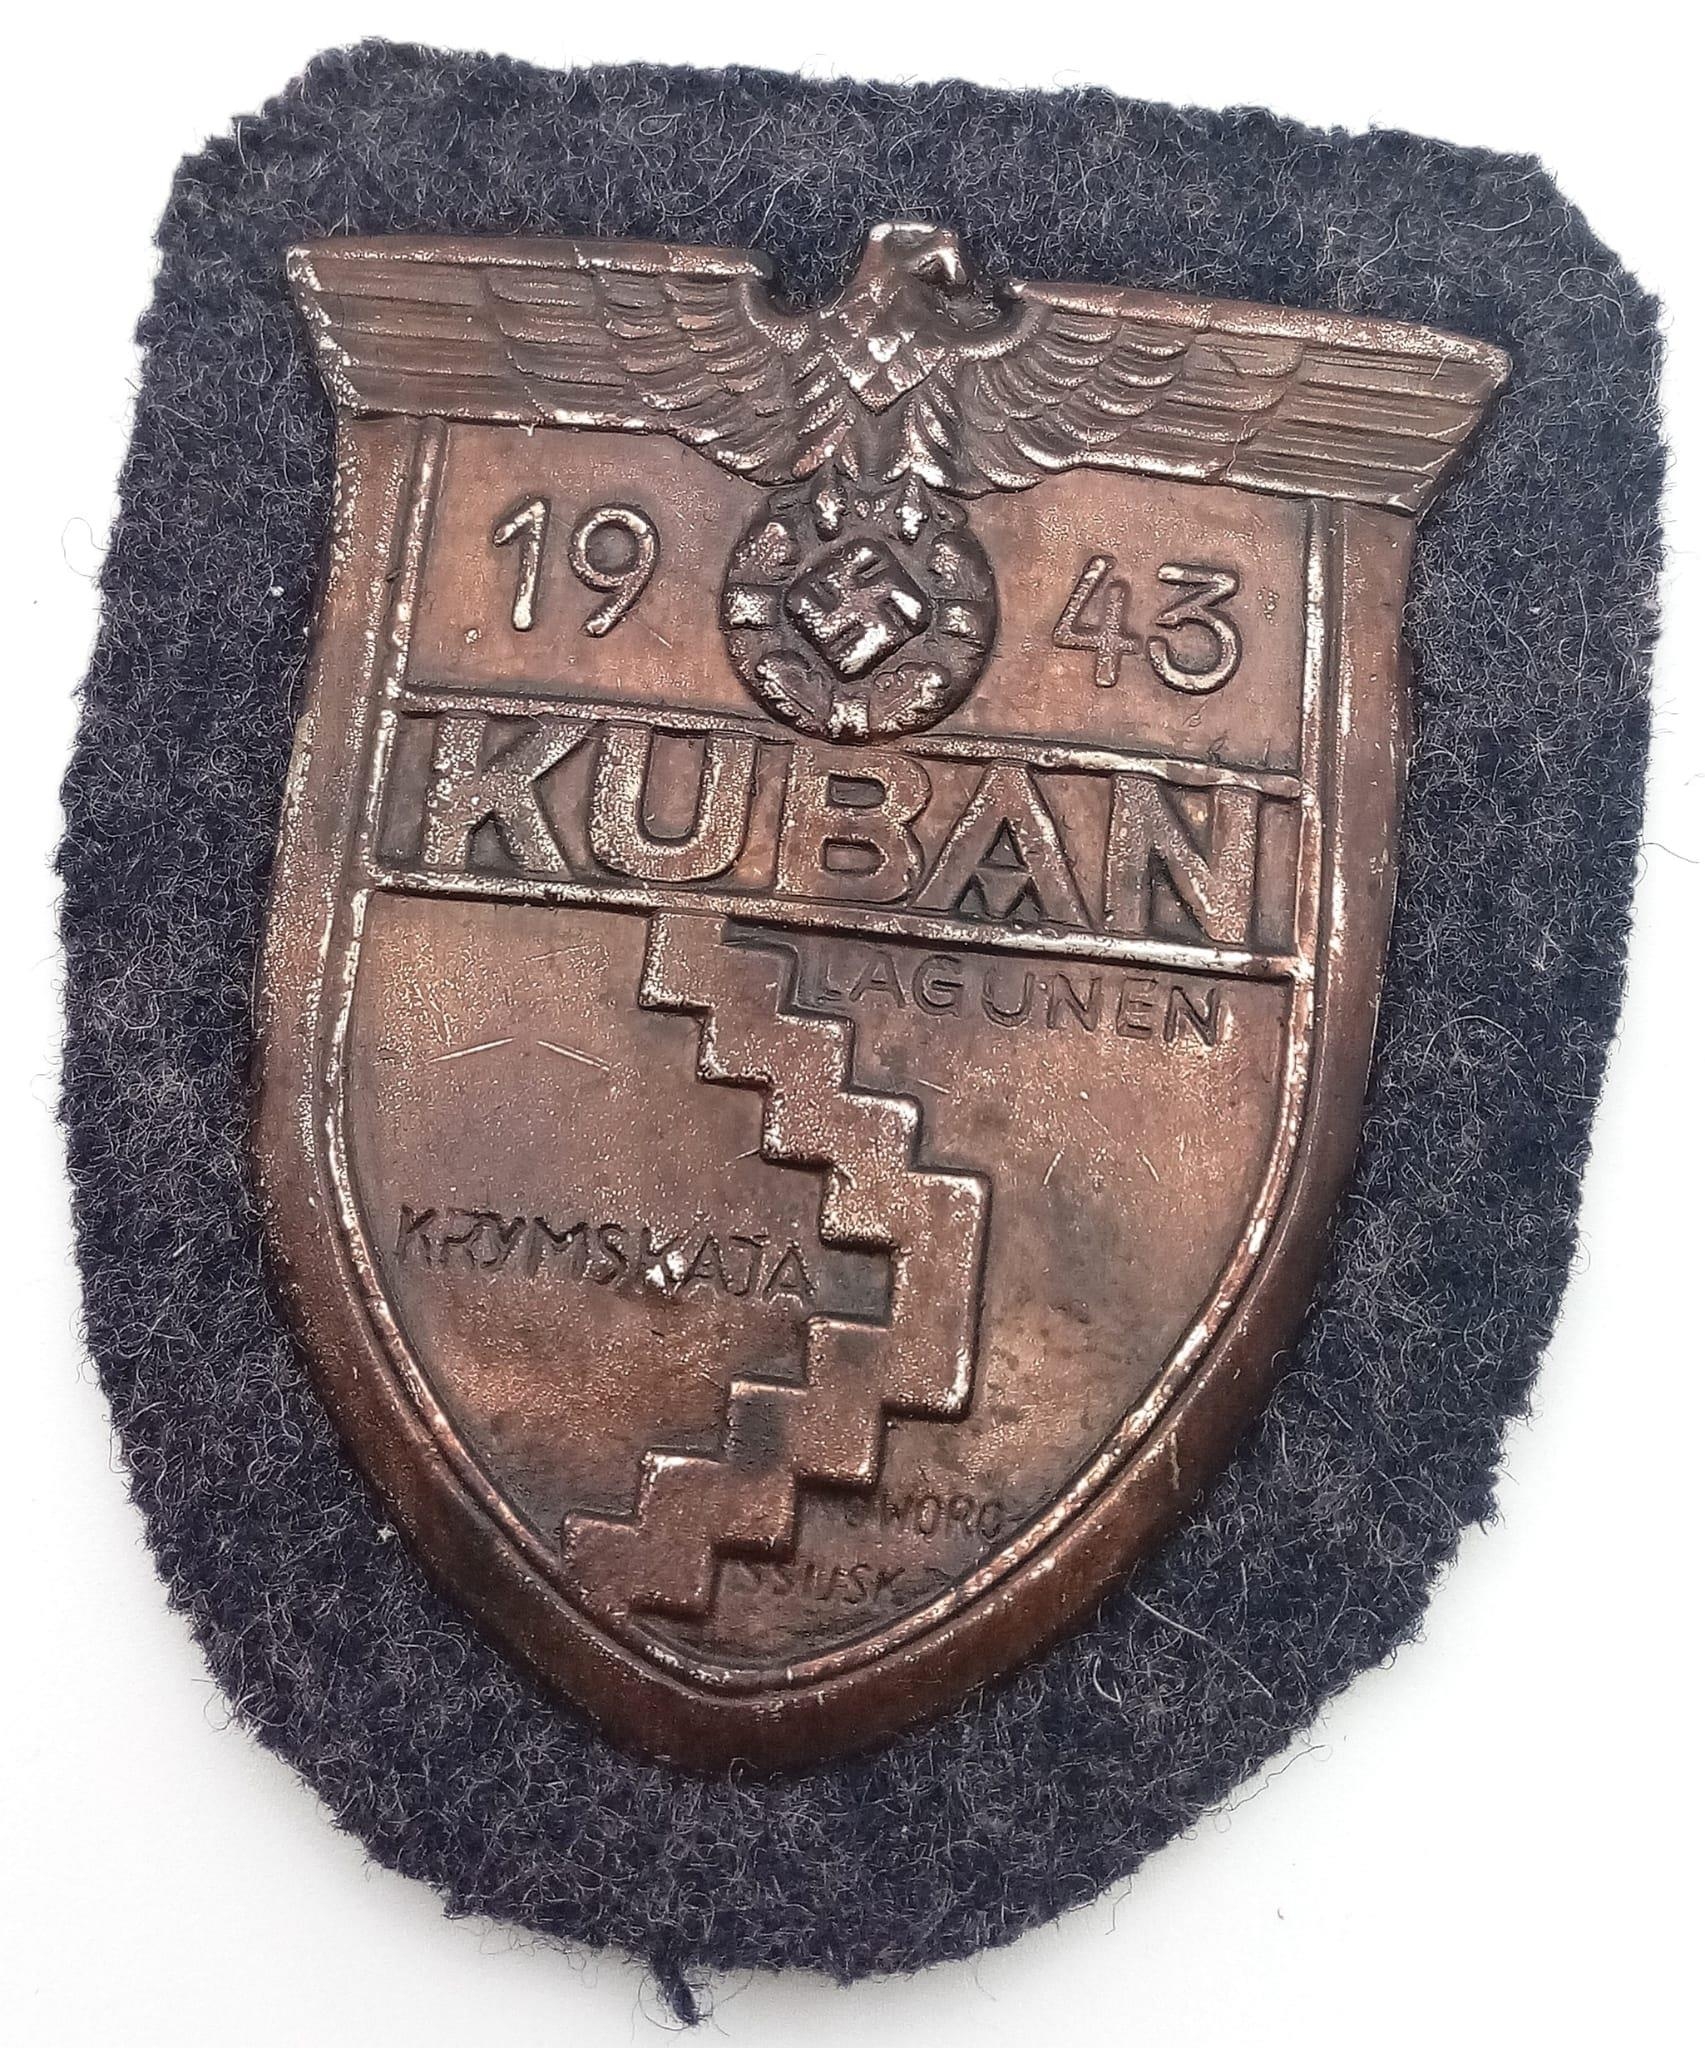 WW2 German Kuban Campaign Shield For Panzer (Armoured) Troops. Complete with presentation Box. - Image 2 of 3